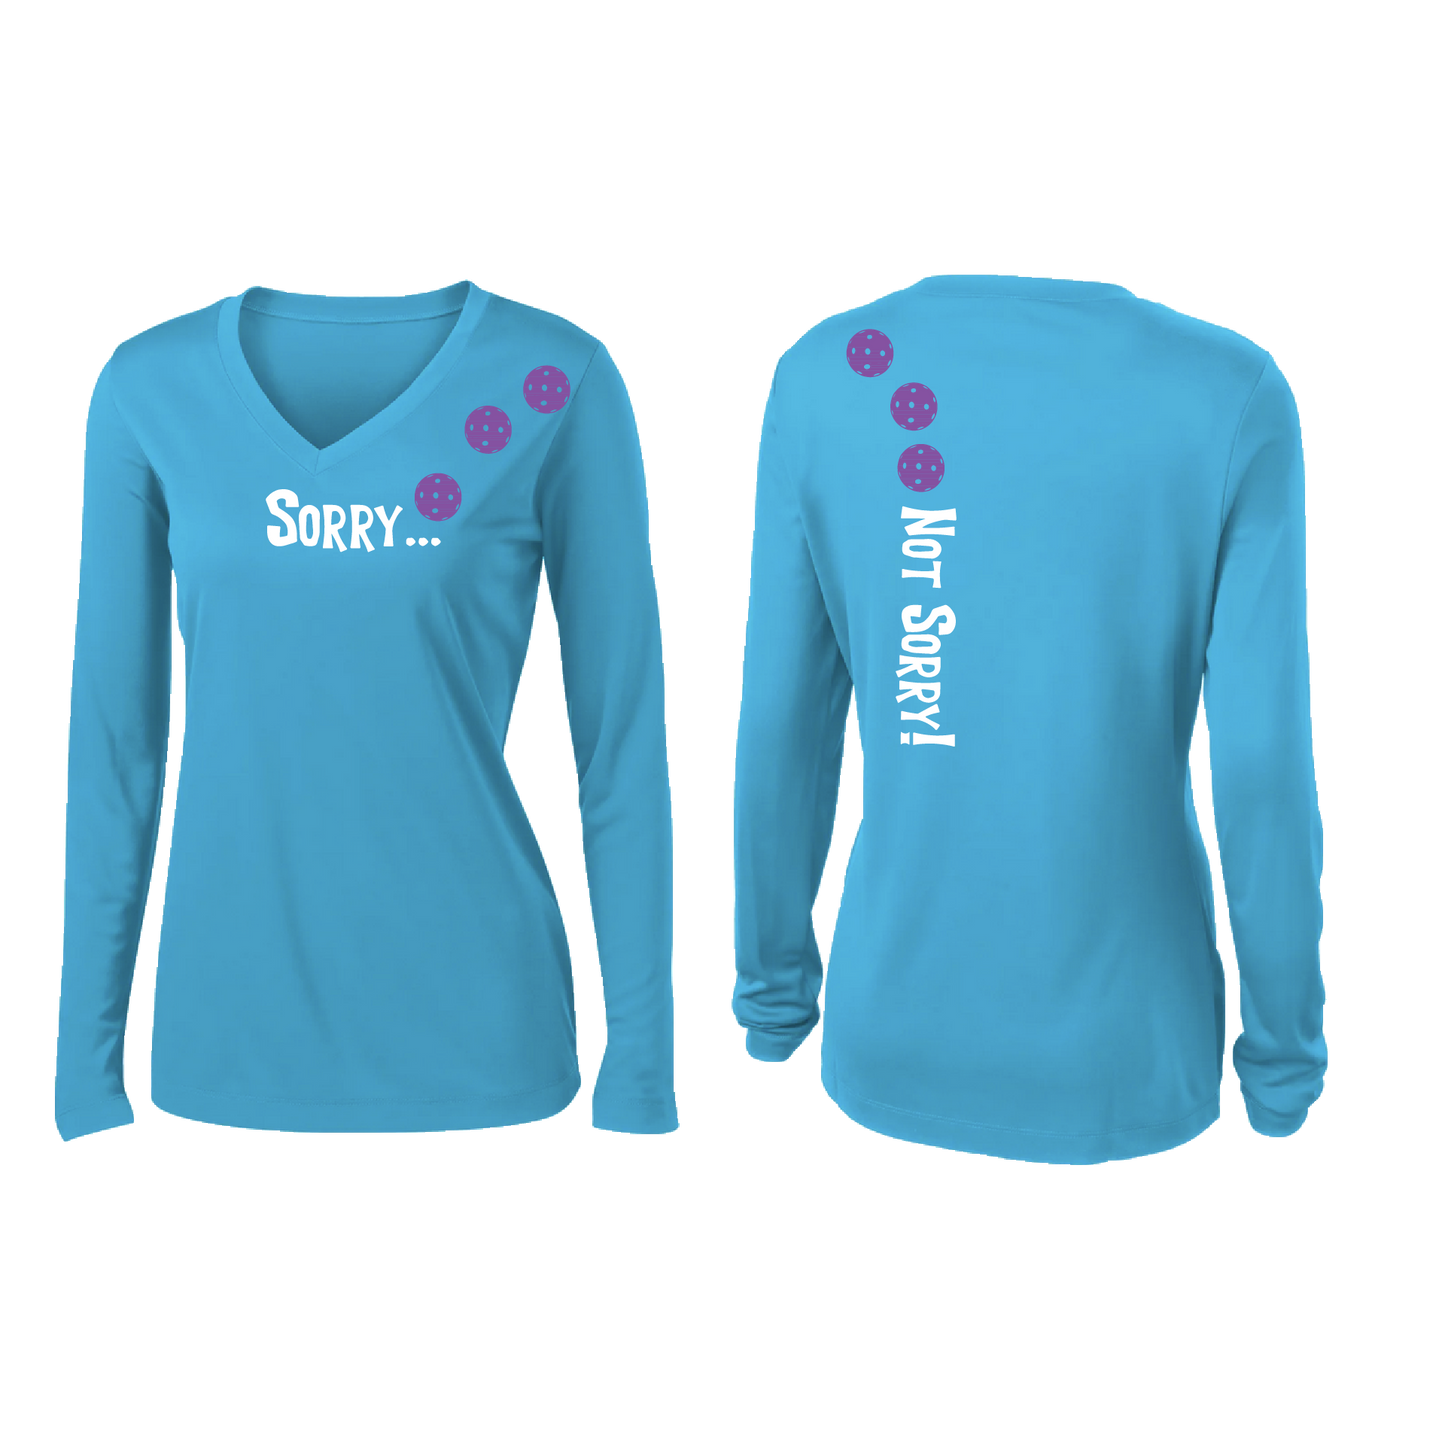 Pickleball Design: Sorry...Not Sorry with Customizable Ball Color - Choose: Orange, Green or Purple.   Women's Styles: Long-Sleeve V-Neck Turn up the volume in this Women's shirt with its perfect mix of softness and attitude. Material is ultra-comfortable with moisture wicking properties and tri-blend softness. PosiCharge technology locks in color. Highly breathable and lightweight.